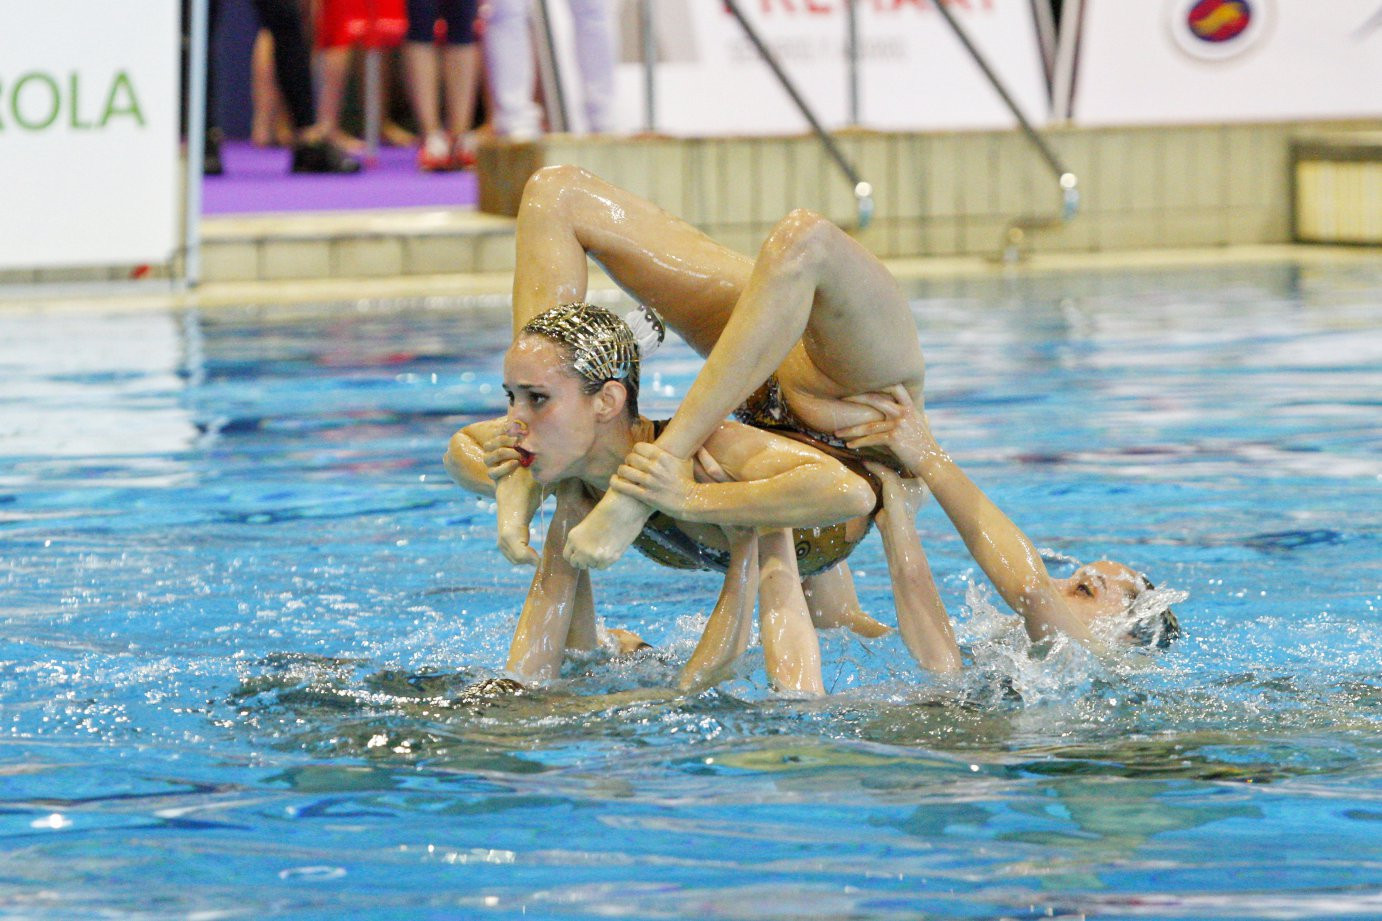 Two gold medals were won on the final day of competition ©FINA